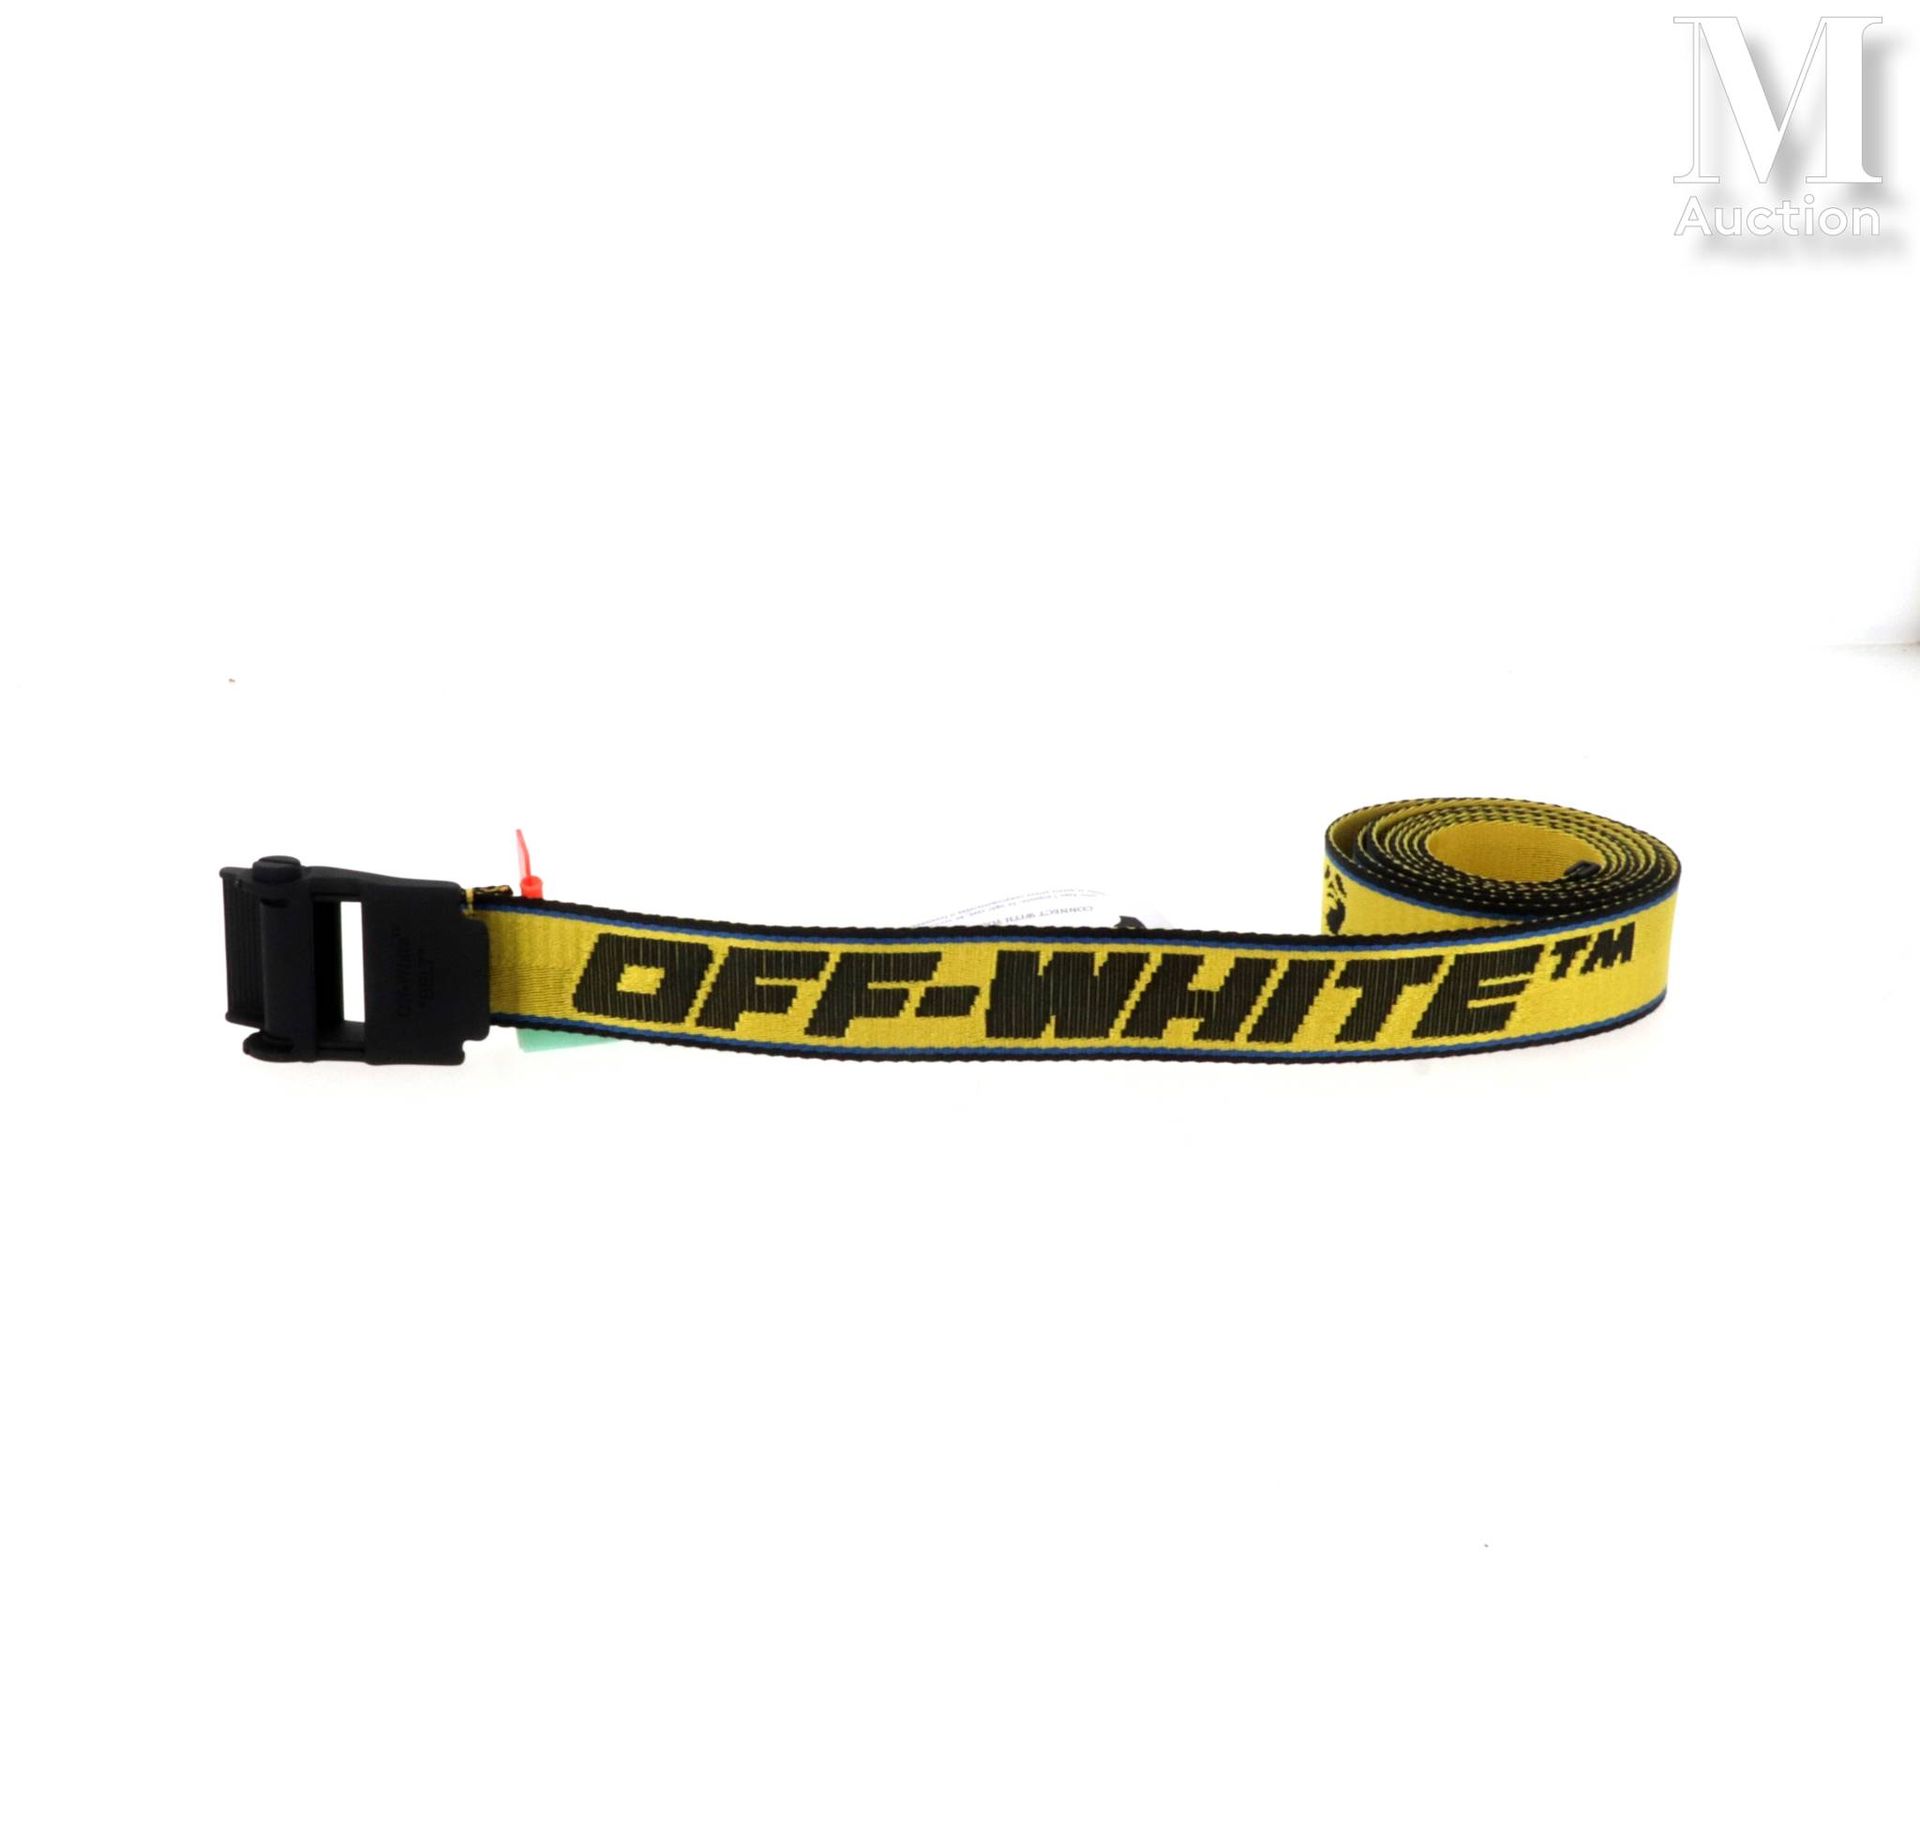 OFF WHITE INDUSTRIAL" BELT
in yellow, black and blue industrial webbing, black m&hellip;